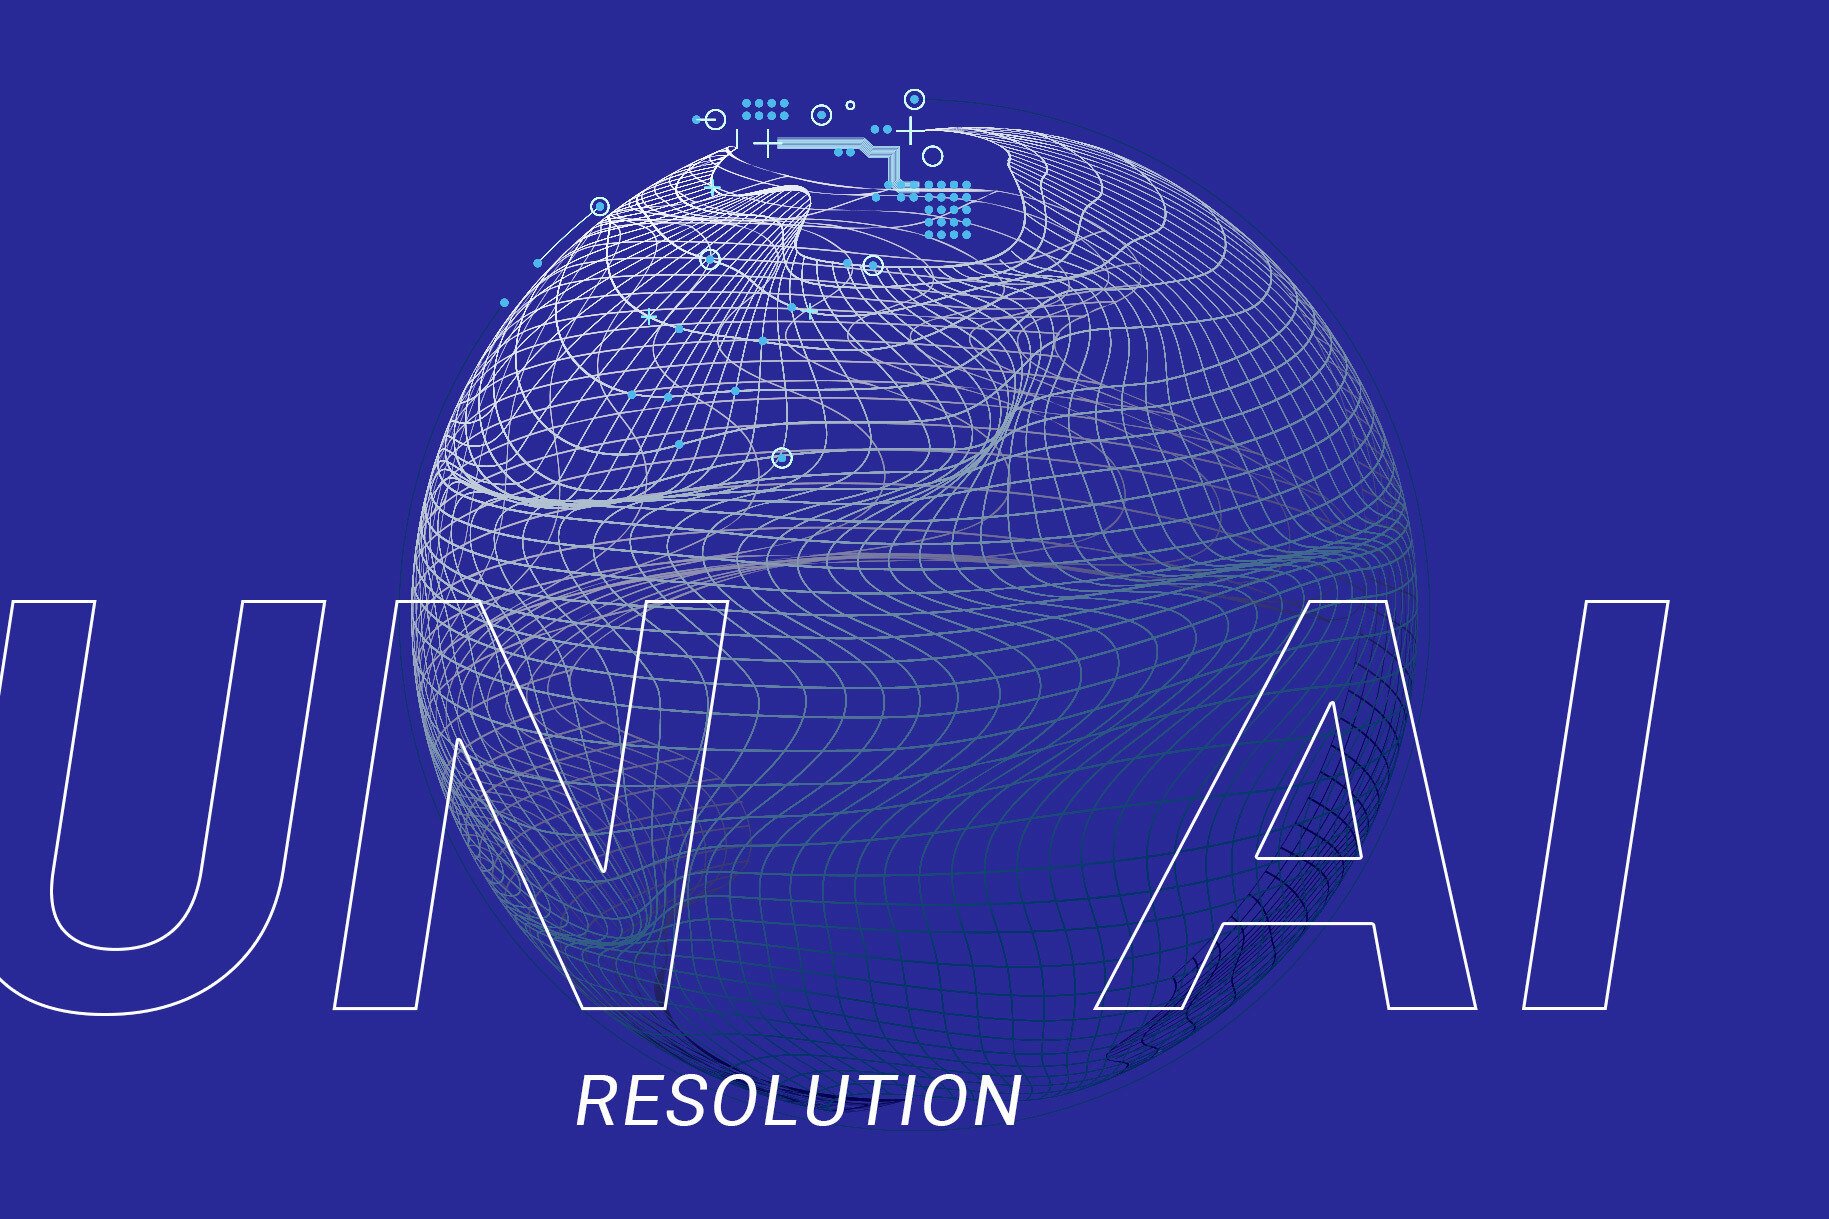 Position Statement on the UN AI Resolution